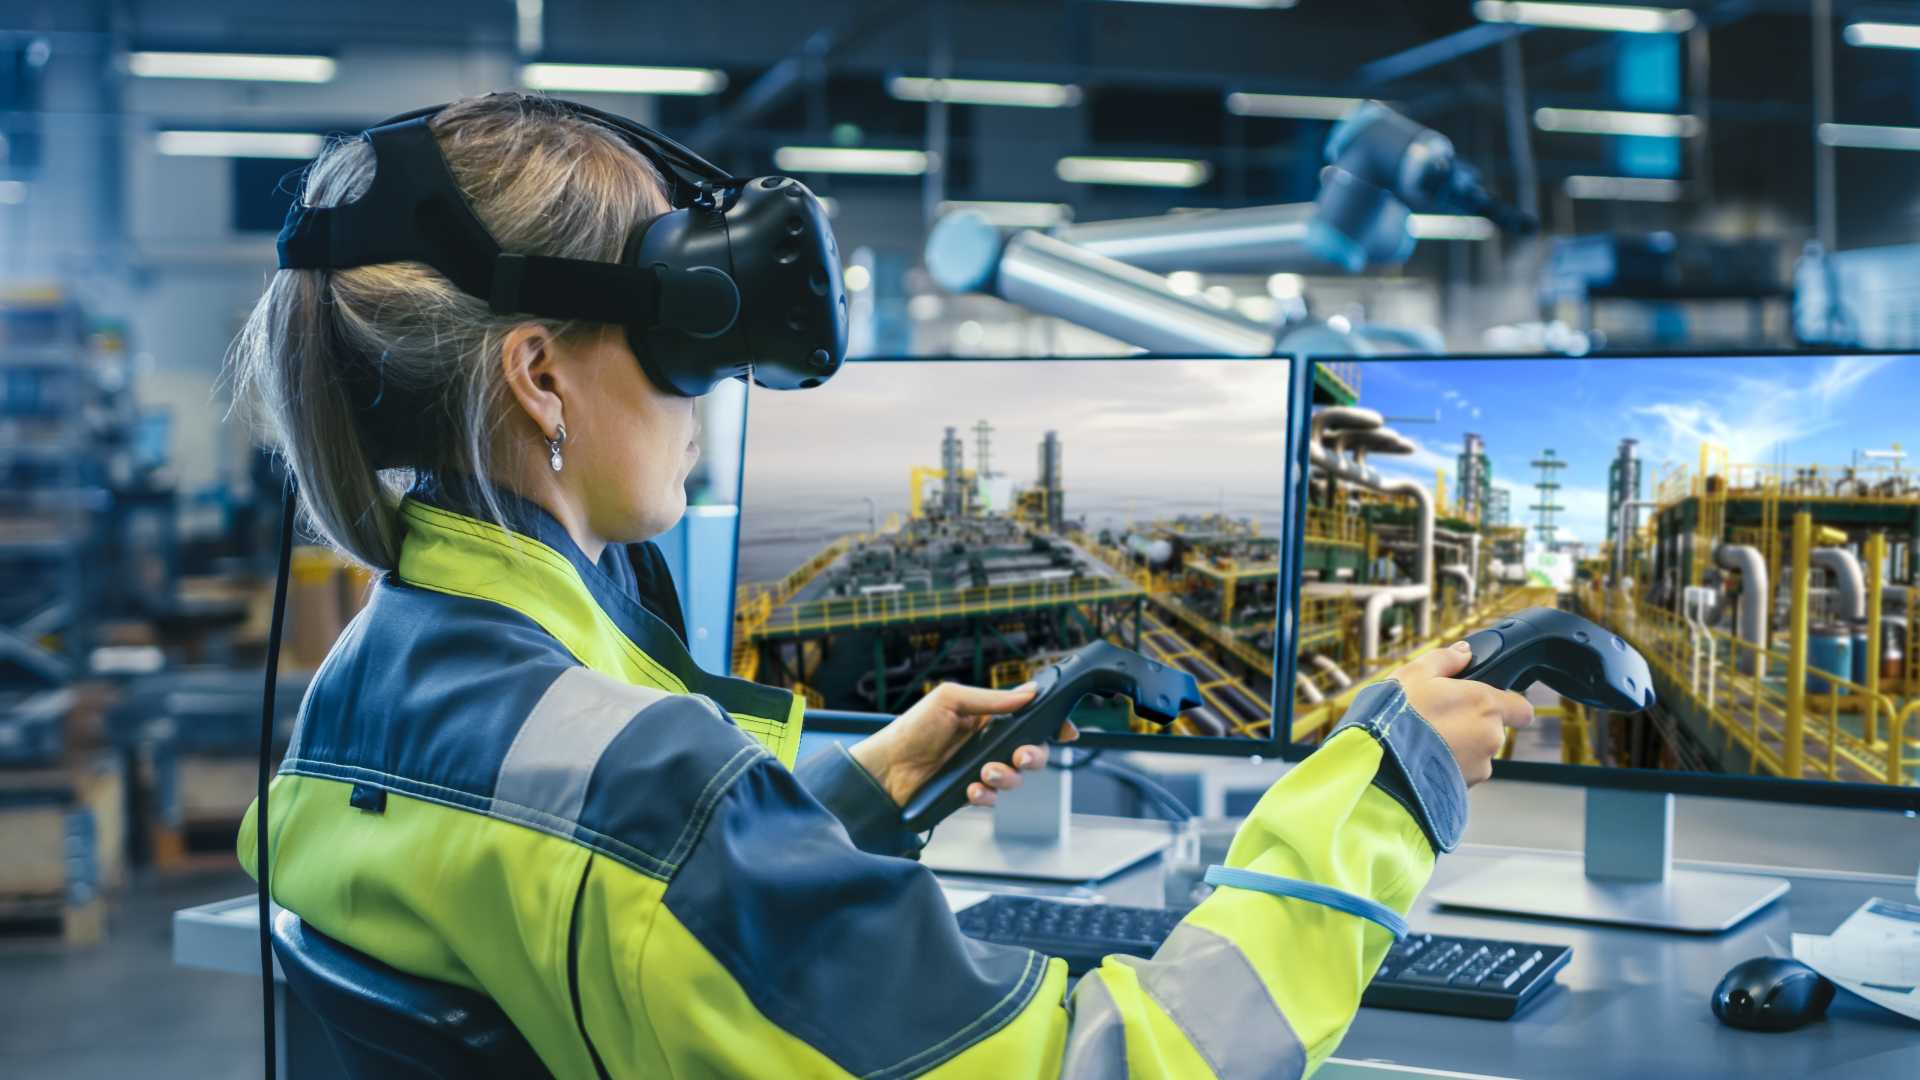 Extended reality platform for immersive industrial training